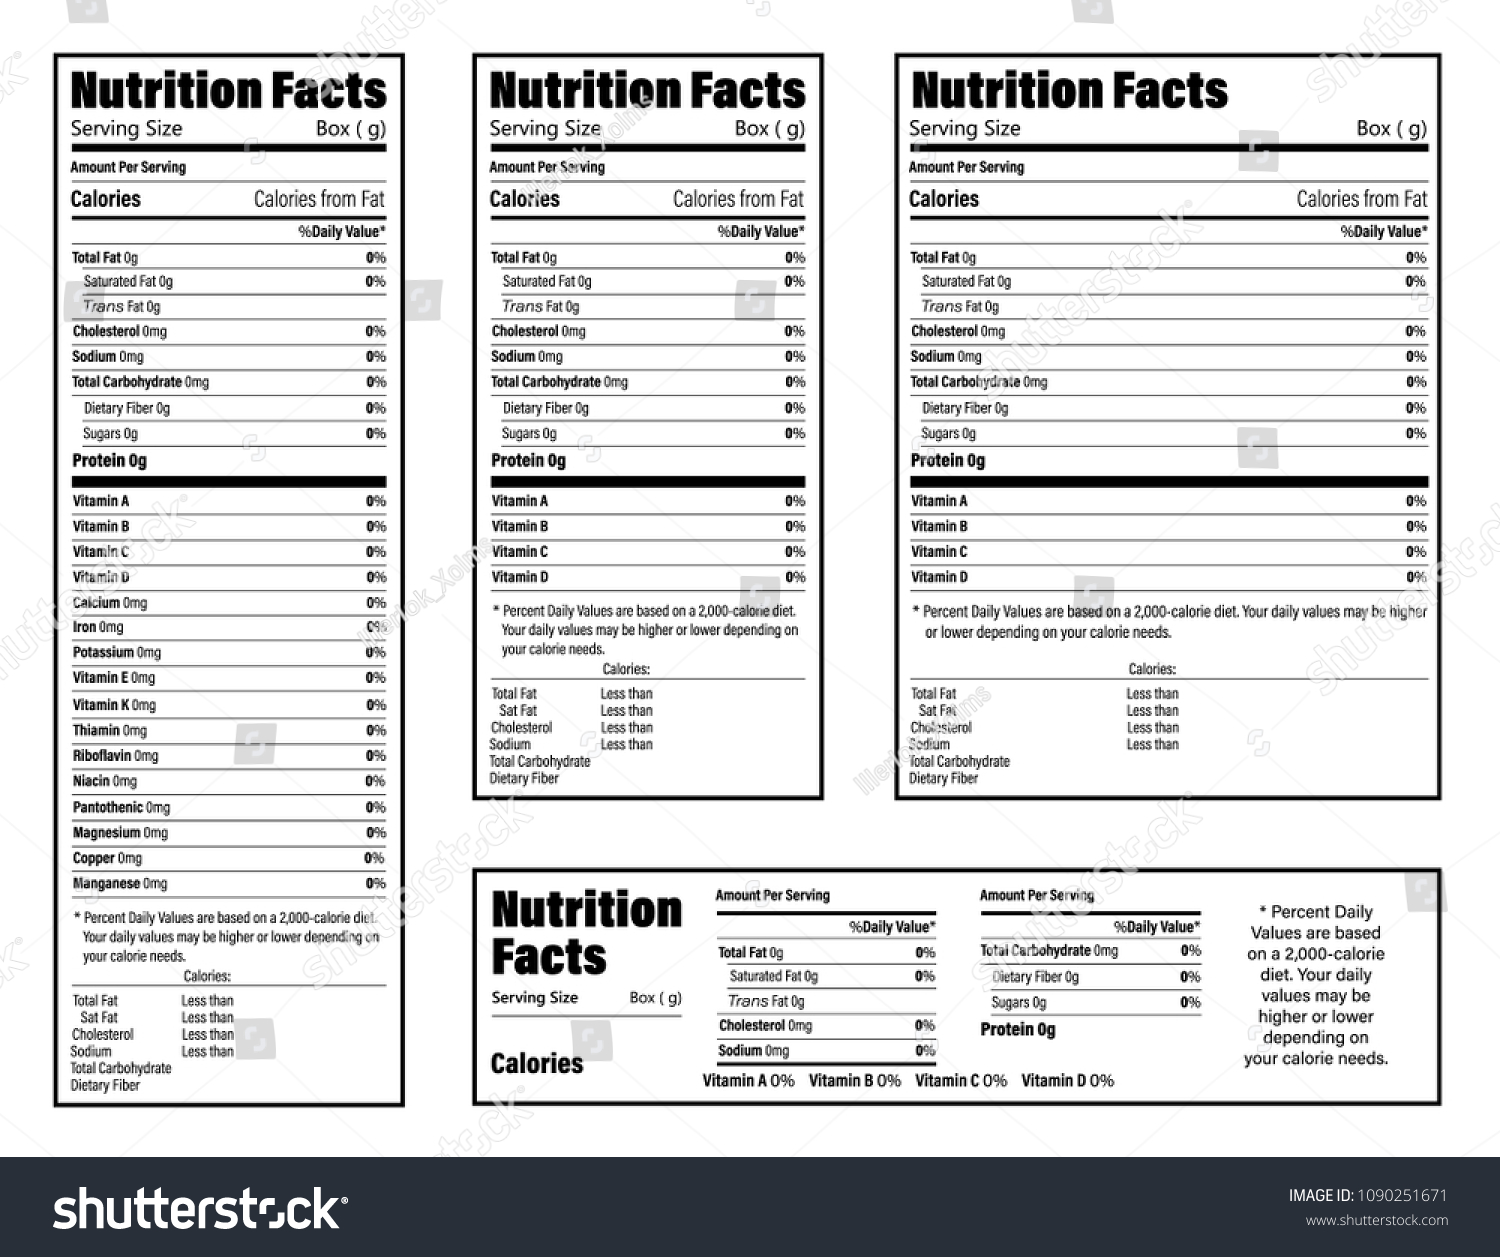 Nutrition Facts information label for box. Daily value ingredient calories, cholesterol and fats in grams and percent. Flat design, vector illustration on background #1090251671